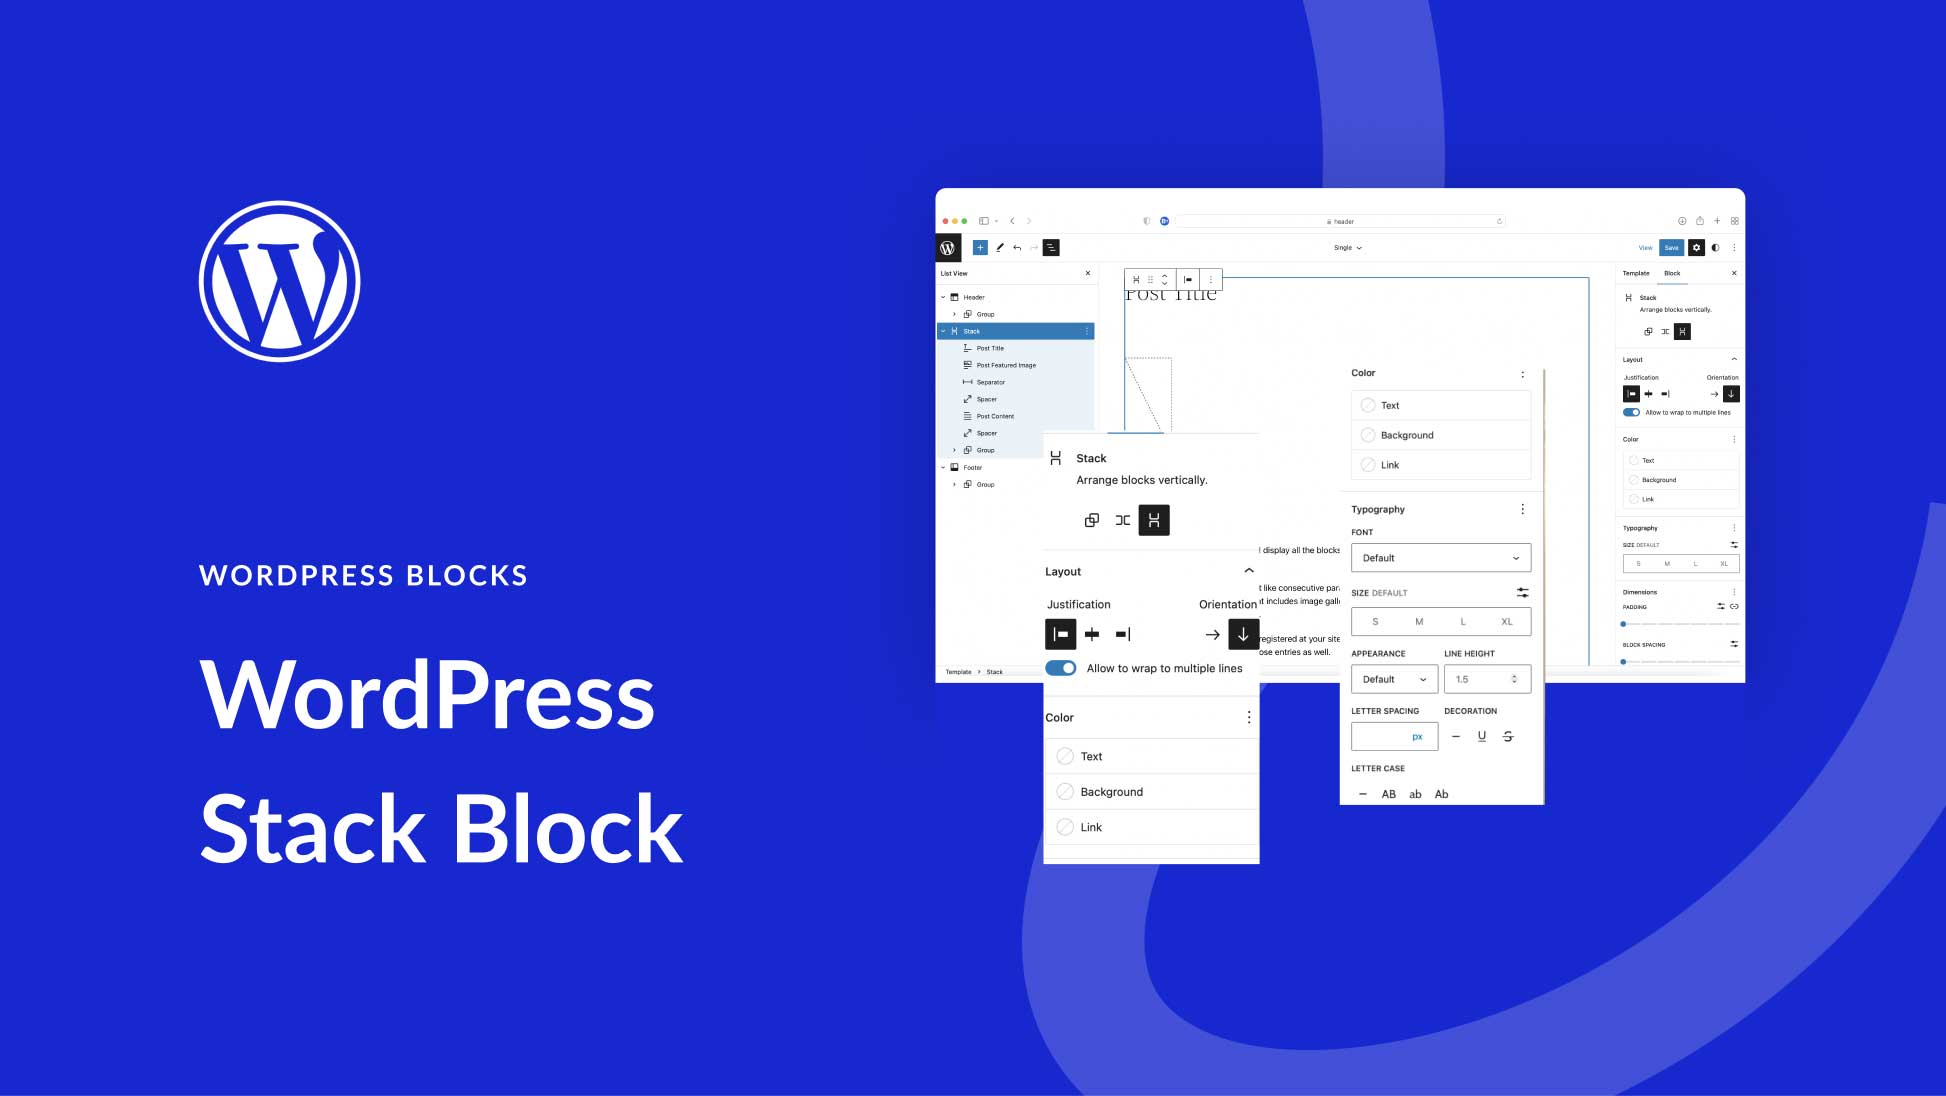 How to Use the WordPress Stack Block